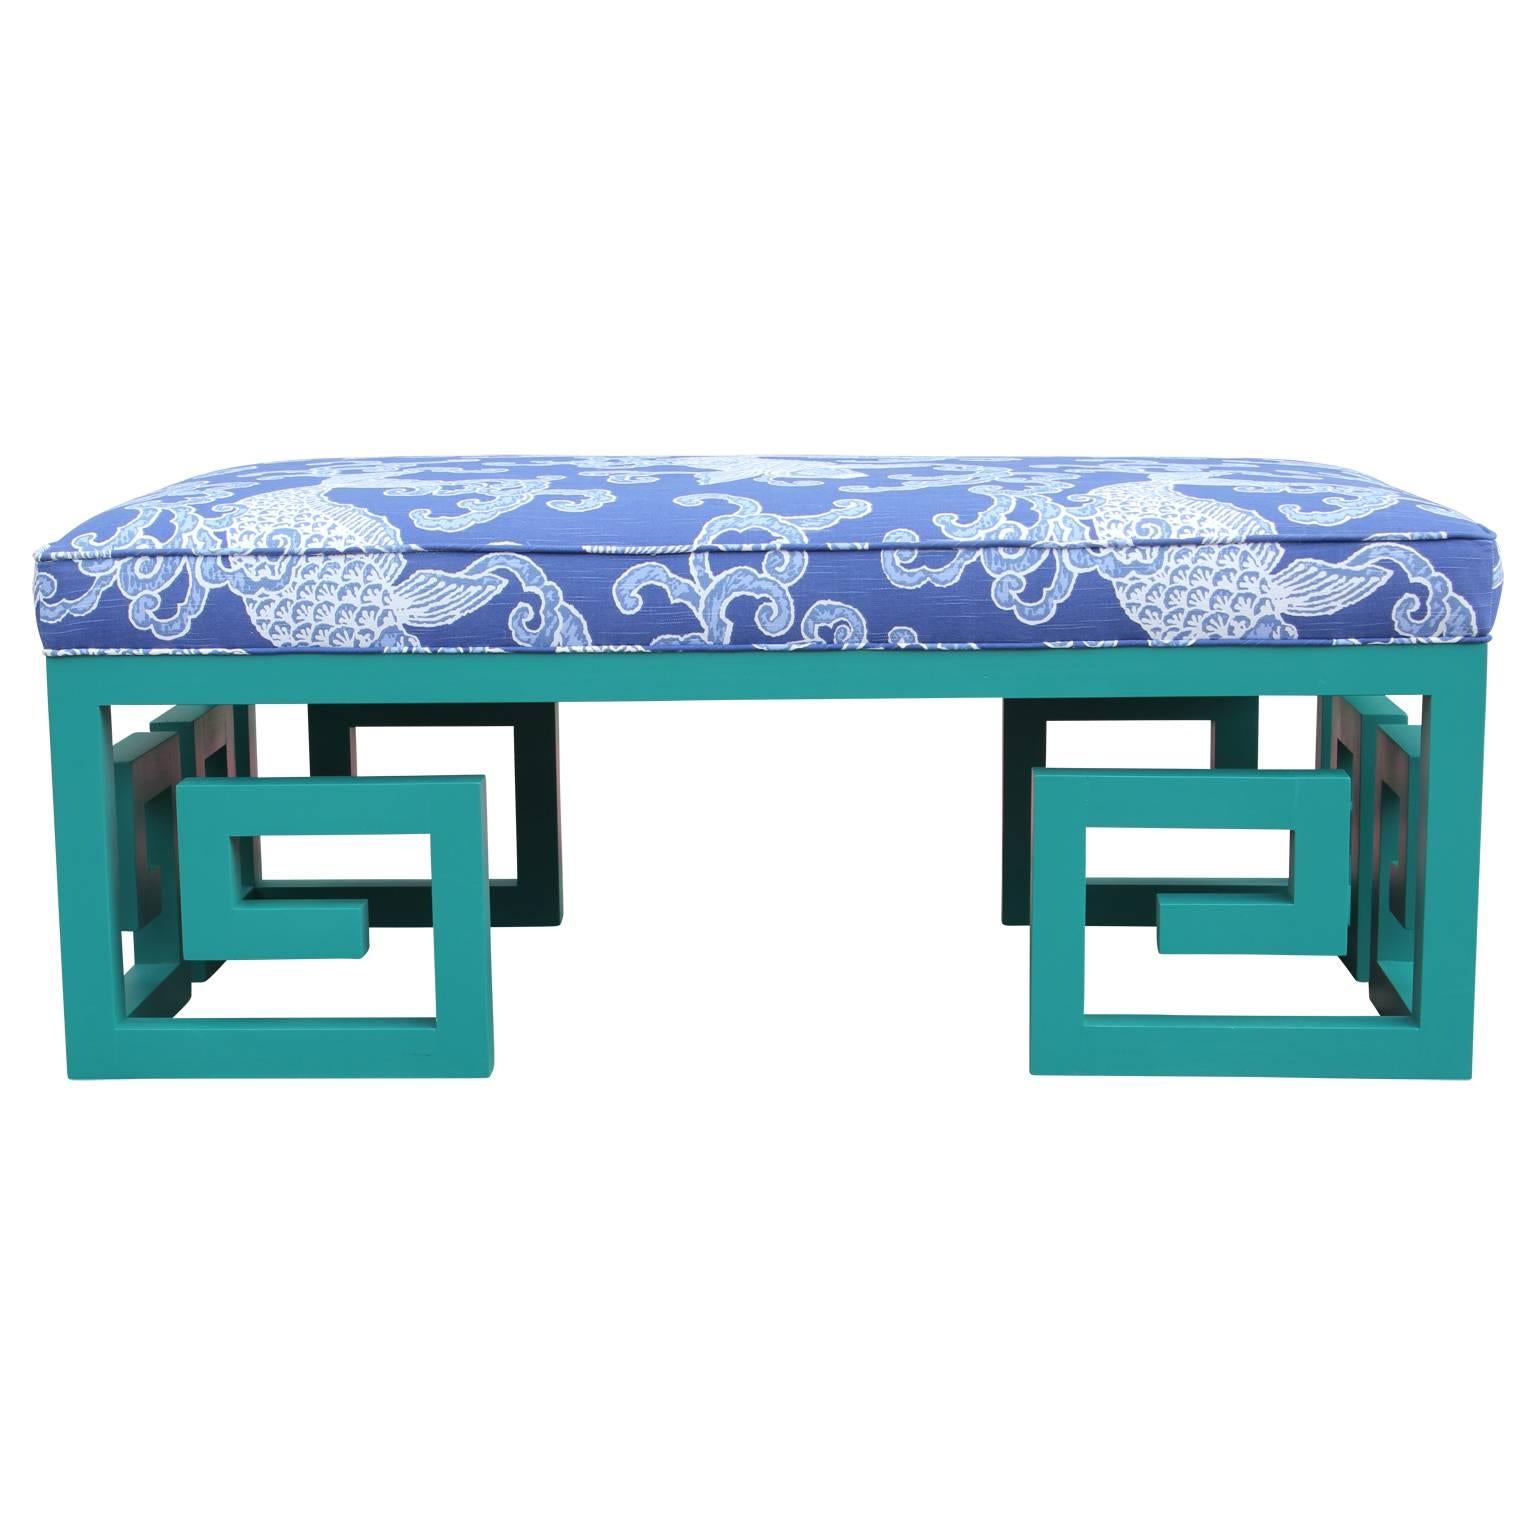 Custom made teal blue Greek key bench with Kravet blue koi fish fabric. This is a custom piece that we make in house. Reminiscent of Kittinger or Baker Furniture 1950s style.